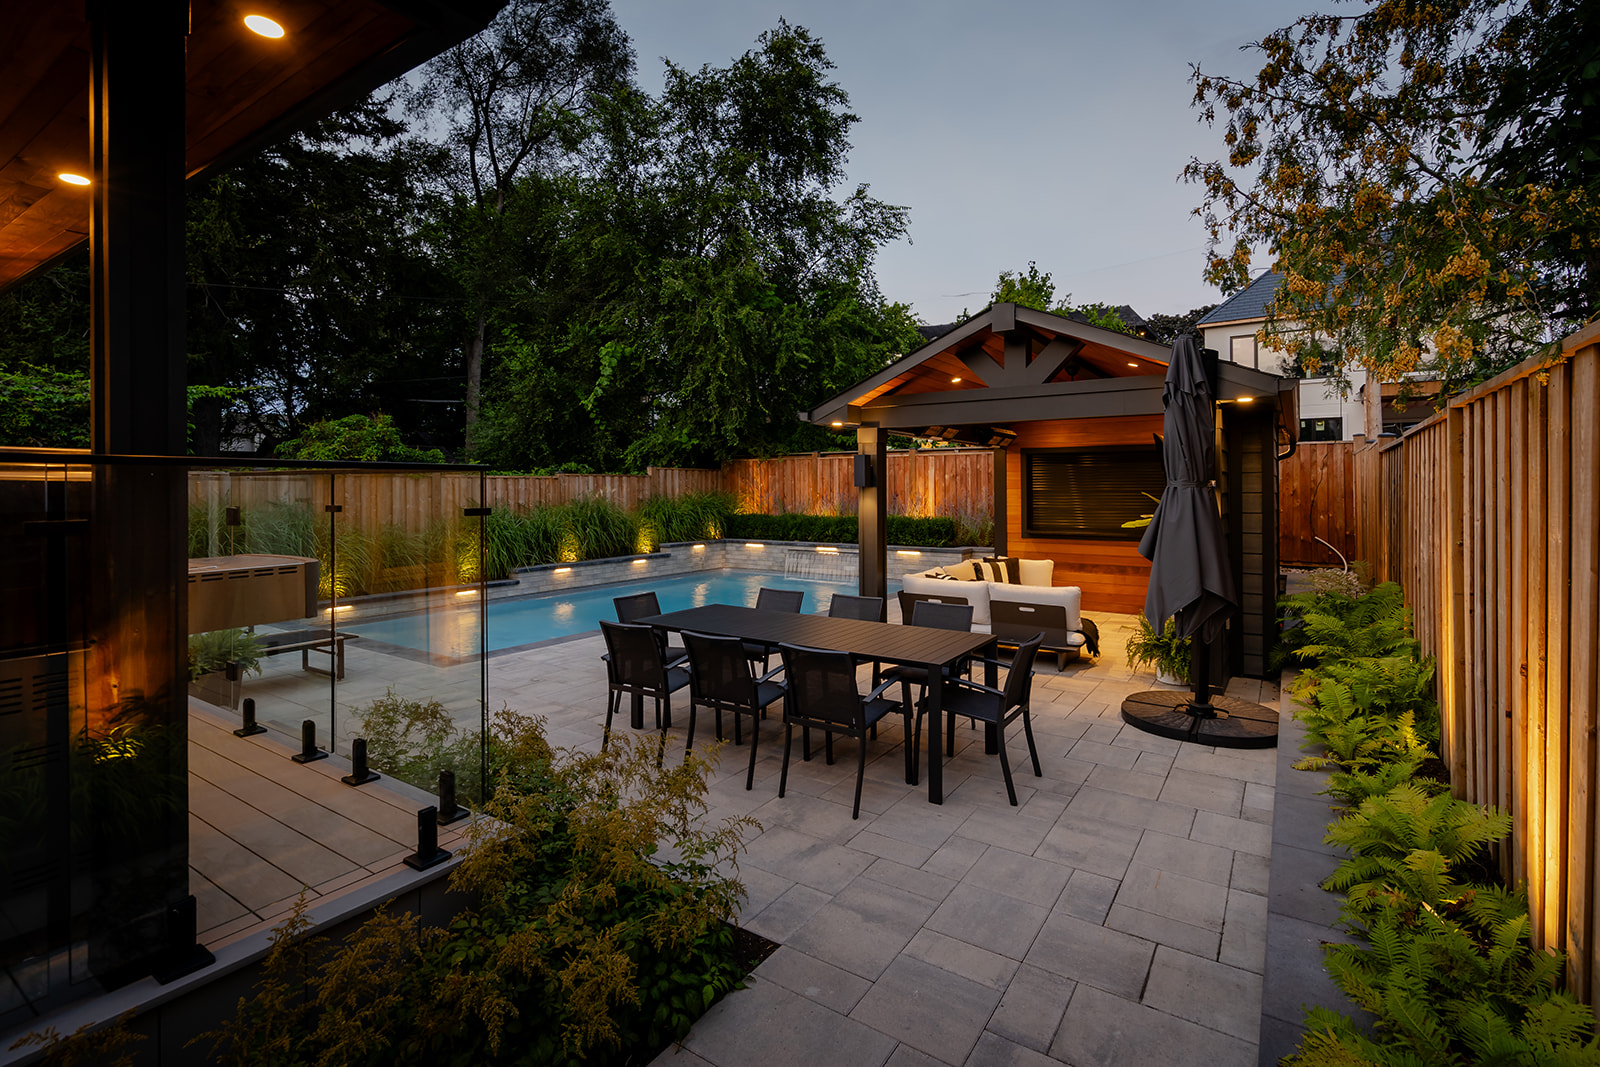 An outdoor patio set with an inground pool in the background.